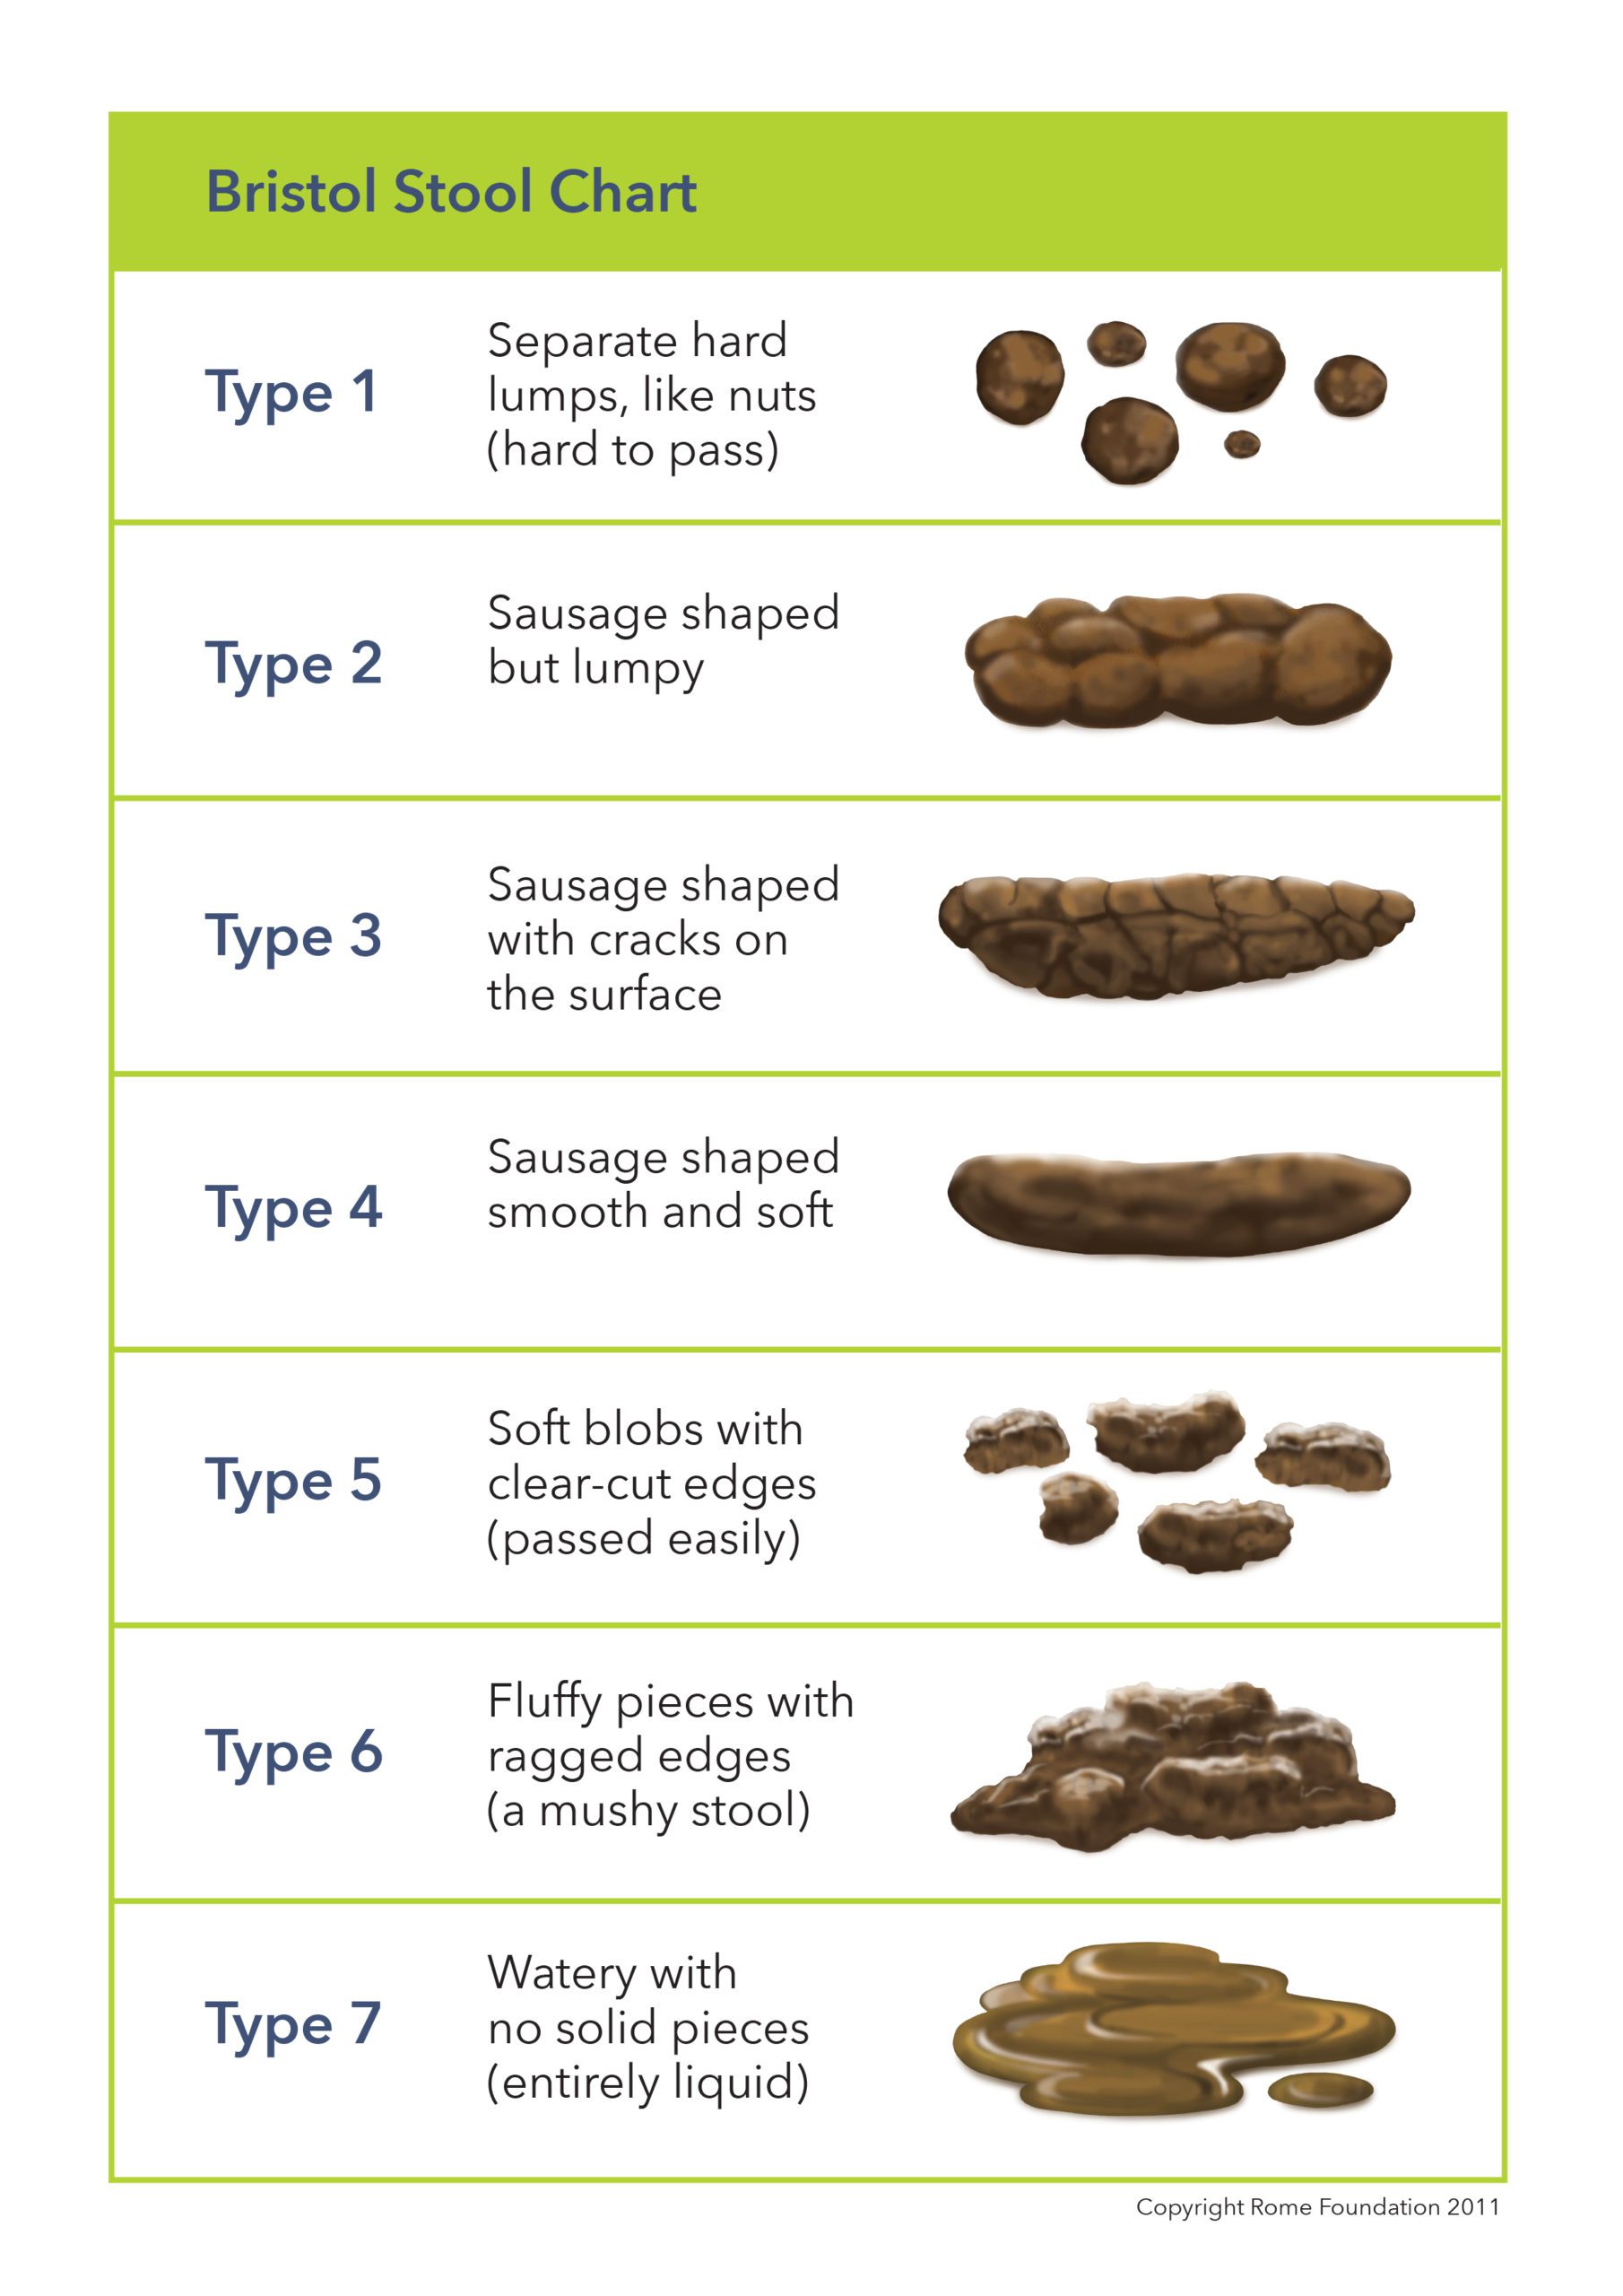 Types of constipation